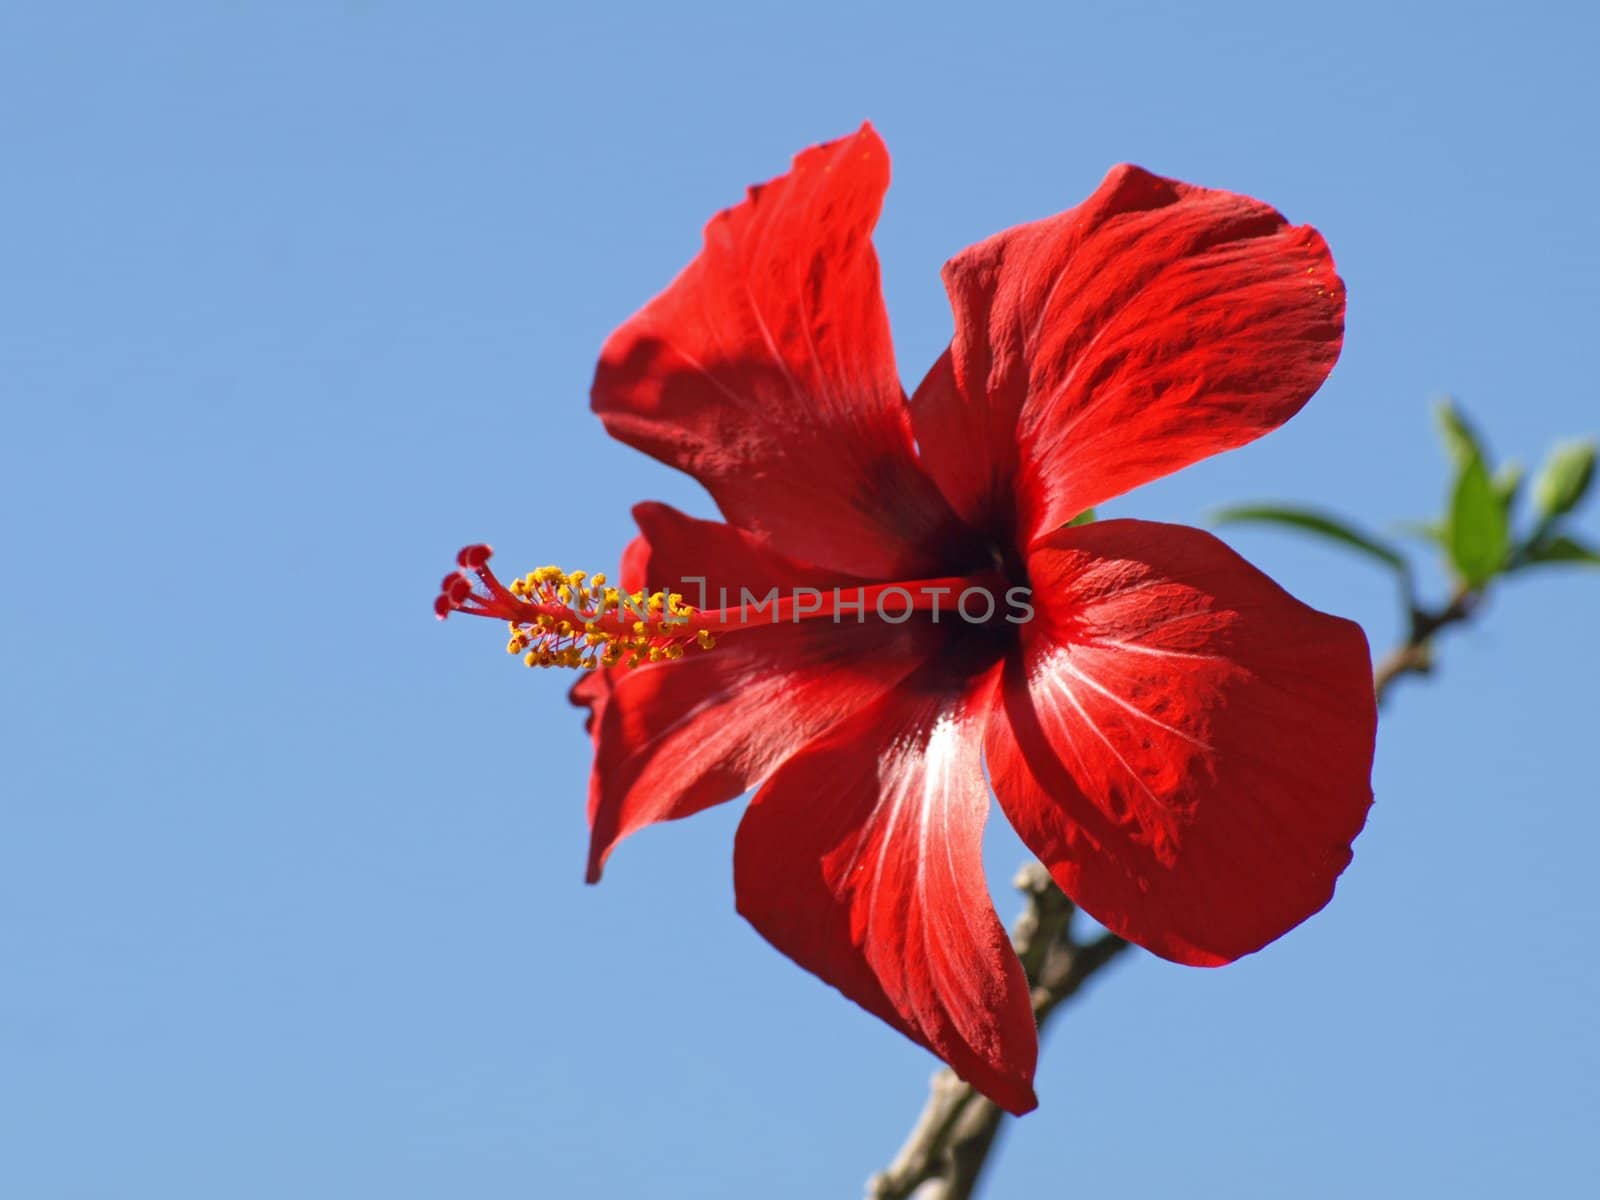 image of a red hibiscus over a blue sky background